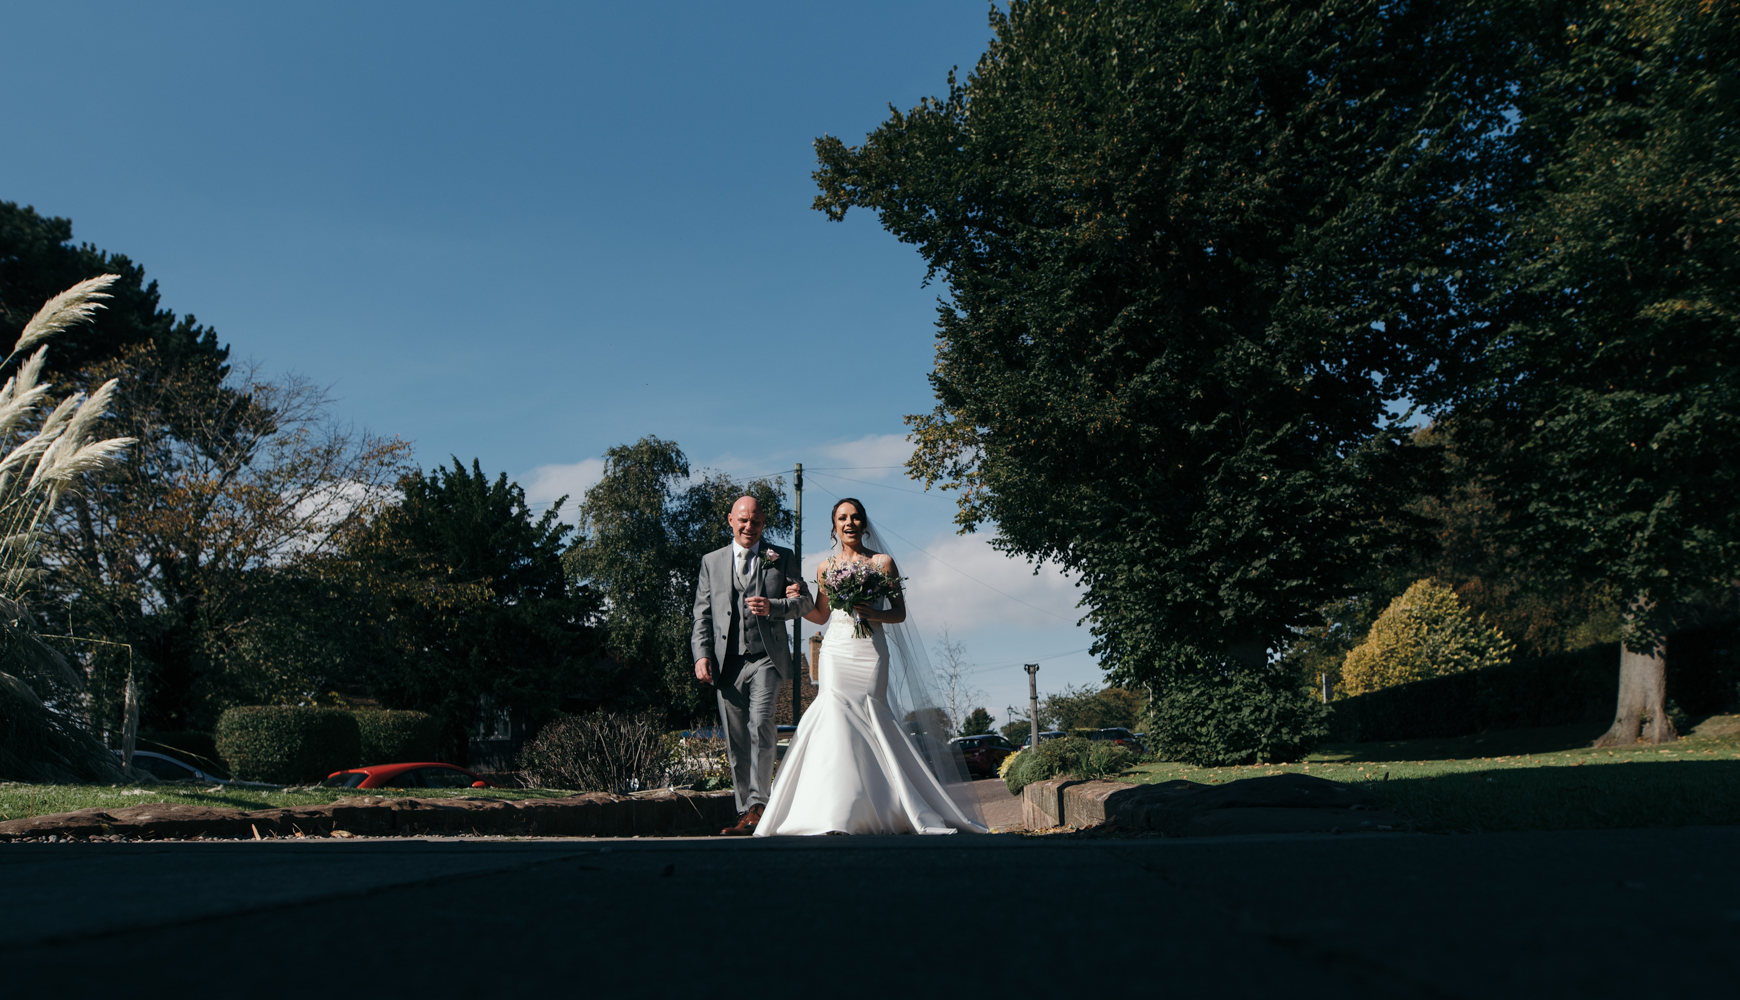 The bride and her father walking up the path to church